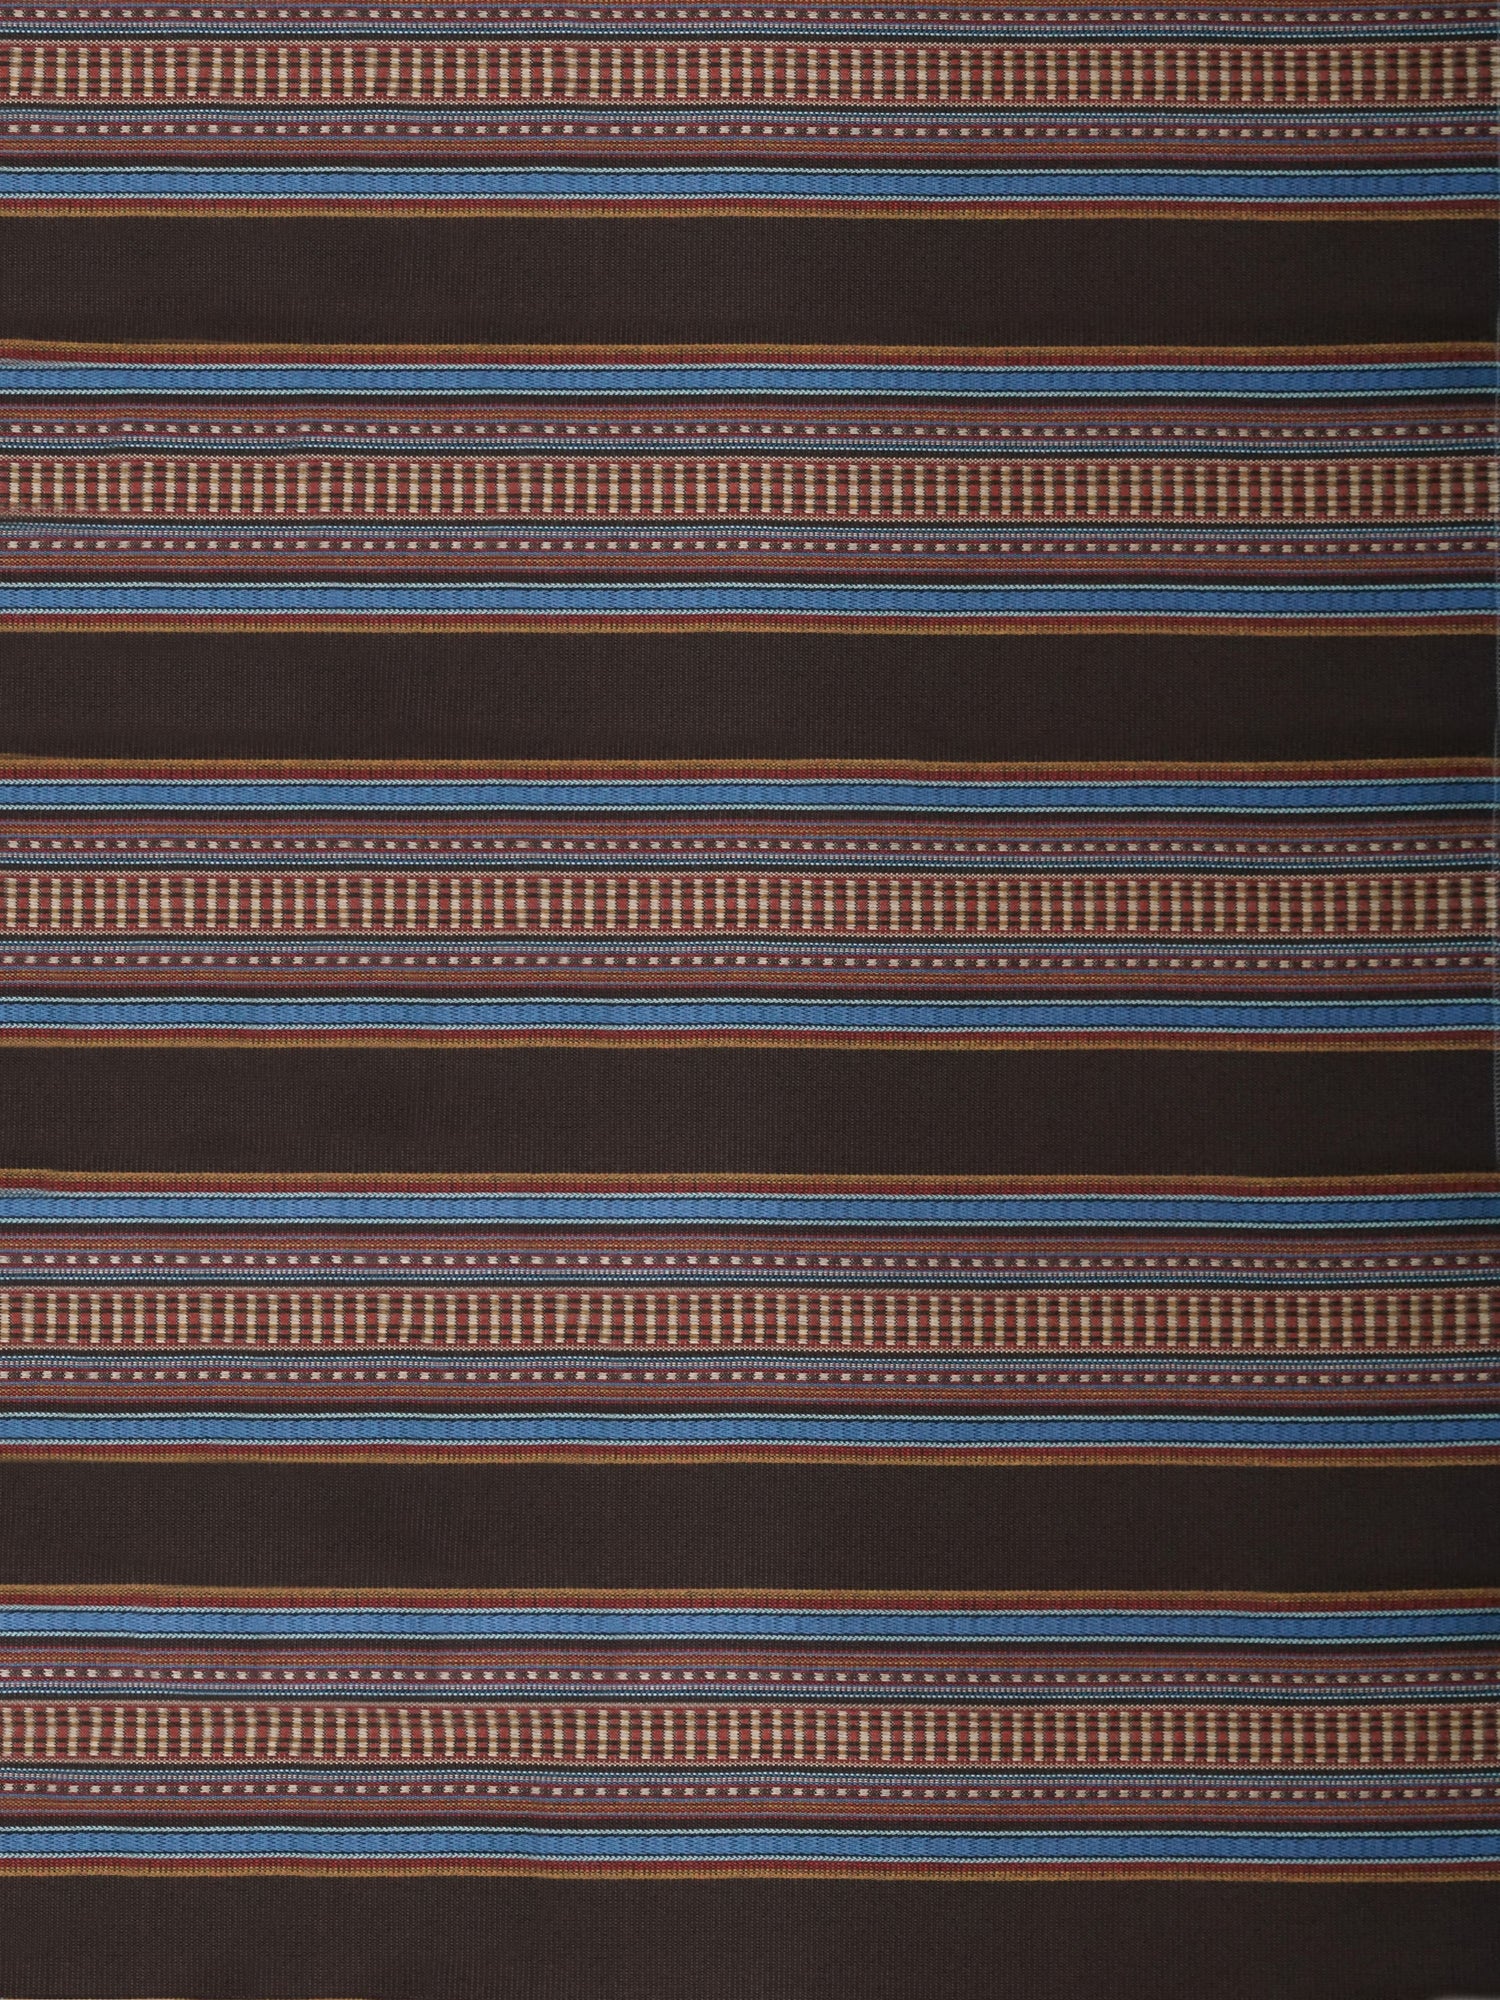 Steinbeck fabric in chocolate color - pattern number SU 00004009 - by Scalamandre in the Old World Weavers collection